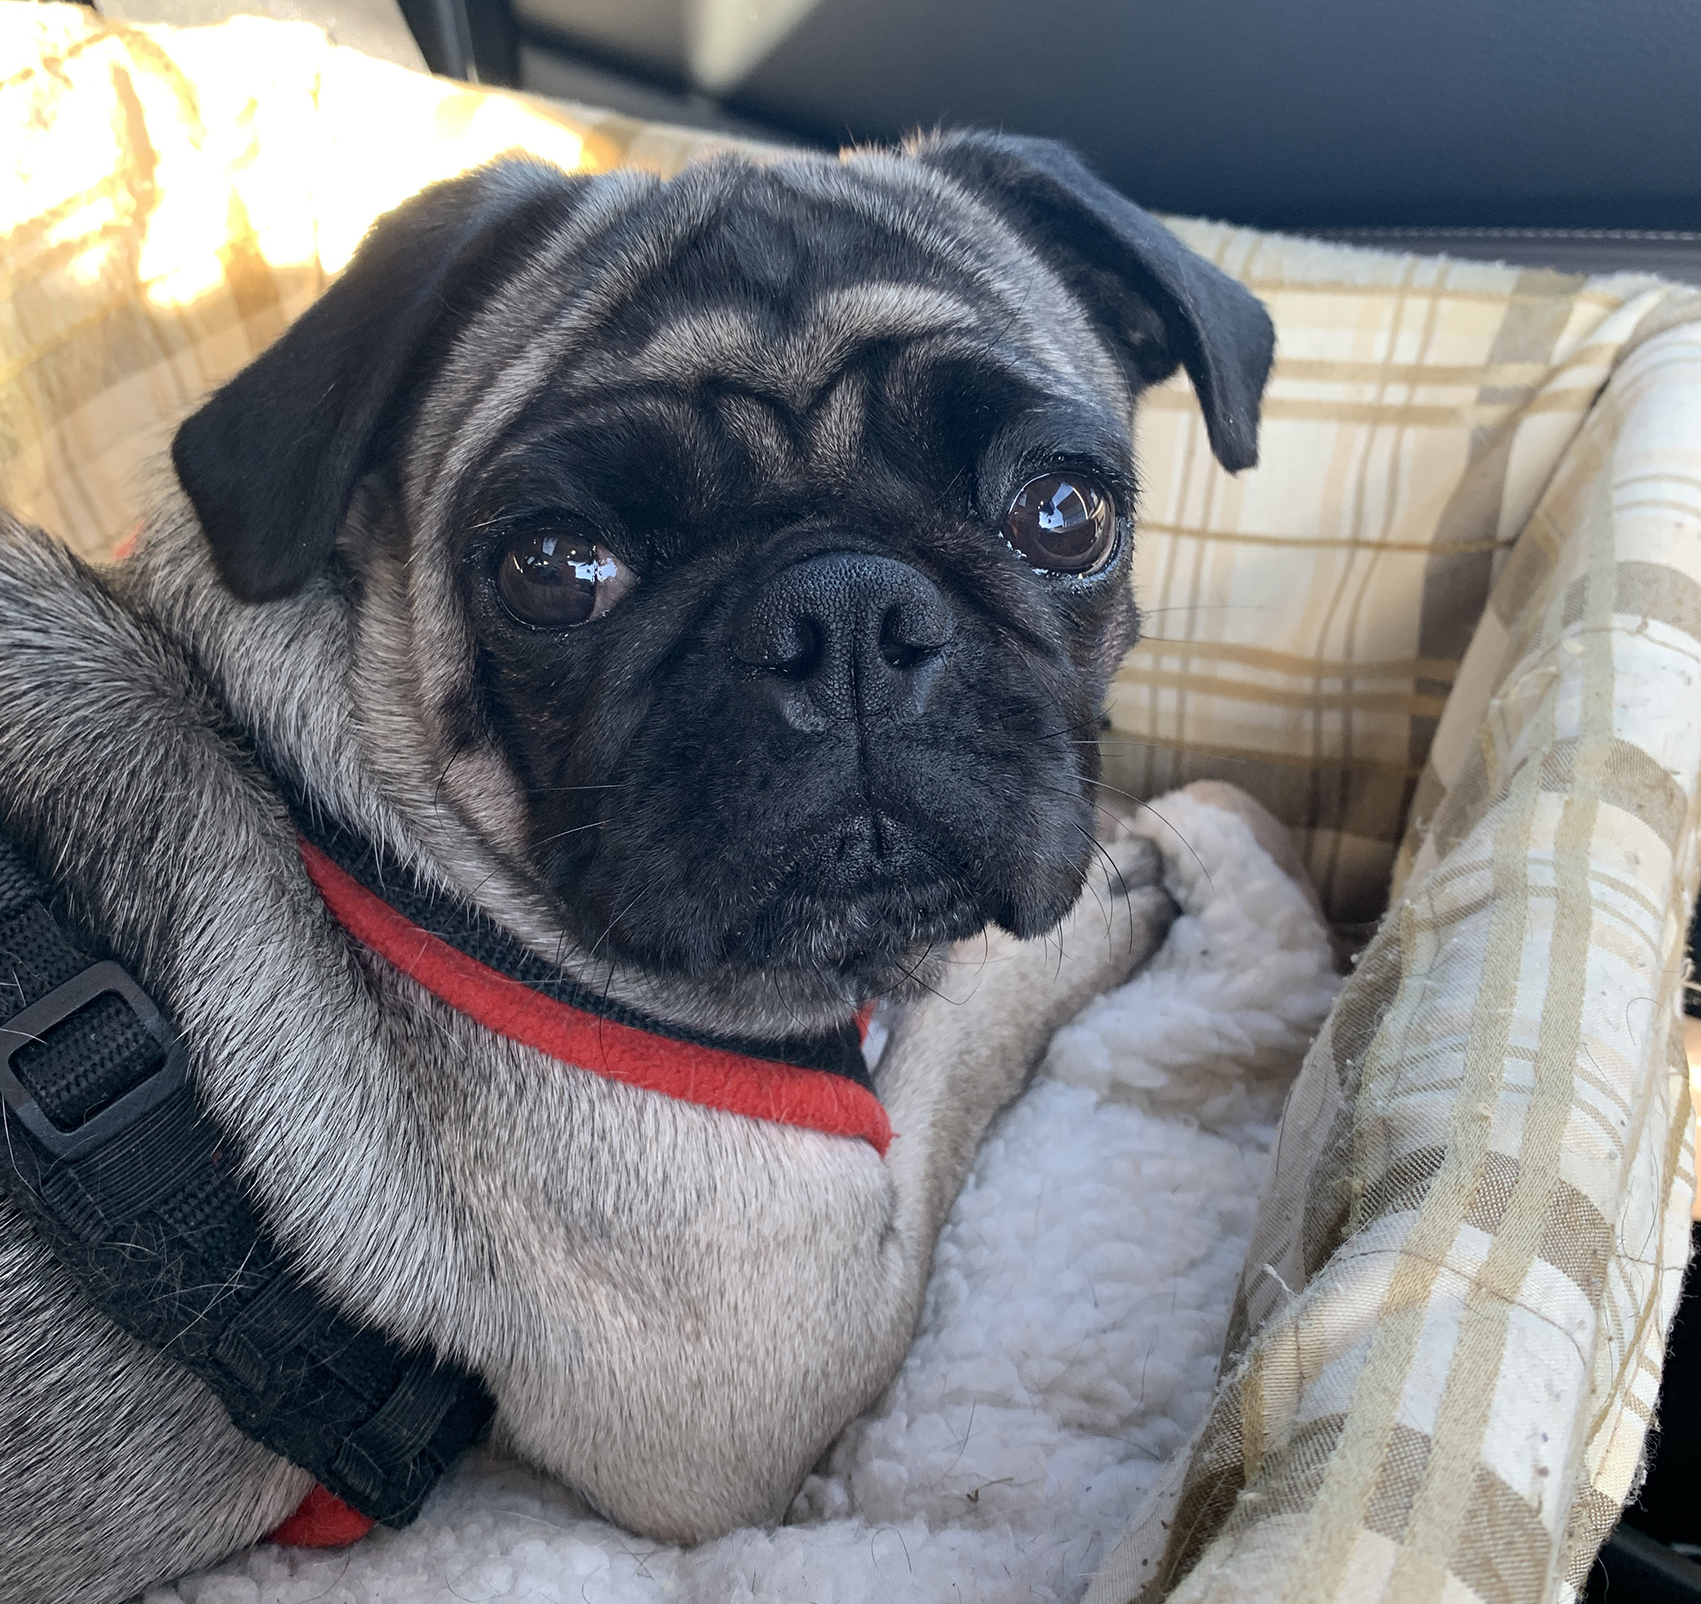 Foster care for Alfie - image Wilma on https://pugprotectiontrust.org